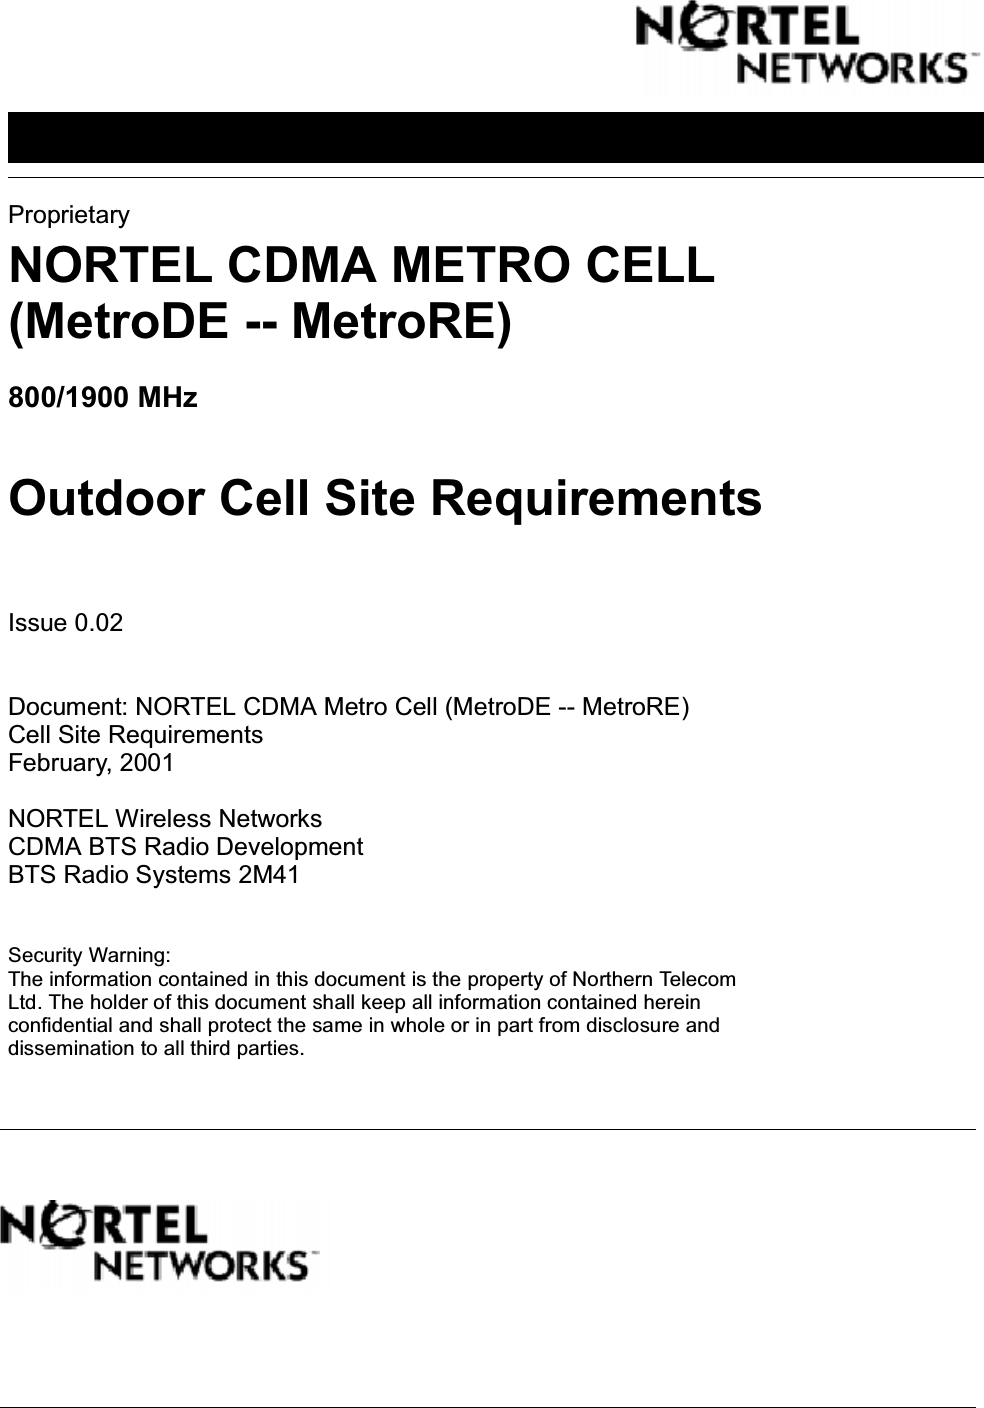 ProprietaryNORTEL CDMA METRO CELL(MetroDE -- MetroRE)800/1900 MHzOutdoor Cell Site Requirements Issue 0.02Document: NORTEL CDMA Metro Cell (MetroDE -- MetroRE)Cell Site RequirementsFebruary, 2001NORTEL Wireless NetworksCDMA BTS Radio DevelopmentBTS Radio Systems 2M41Security Warning:The information contained in this document is the property of Northern TelecomLtd. The holder of this document shall keep all information contained hereinconfidential and shall protect the same in whole or in part from disclosure anddissemination to all third parties.